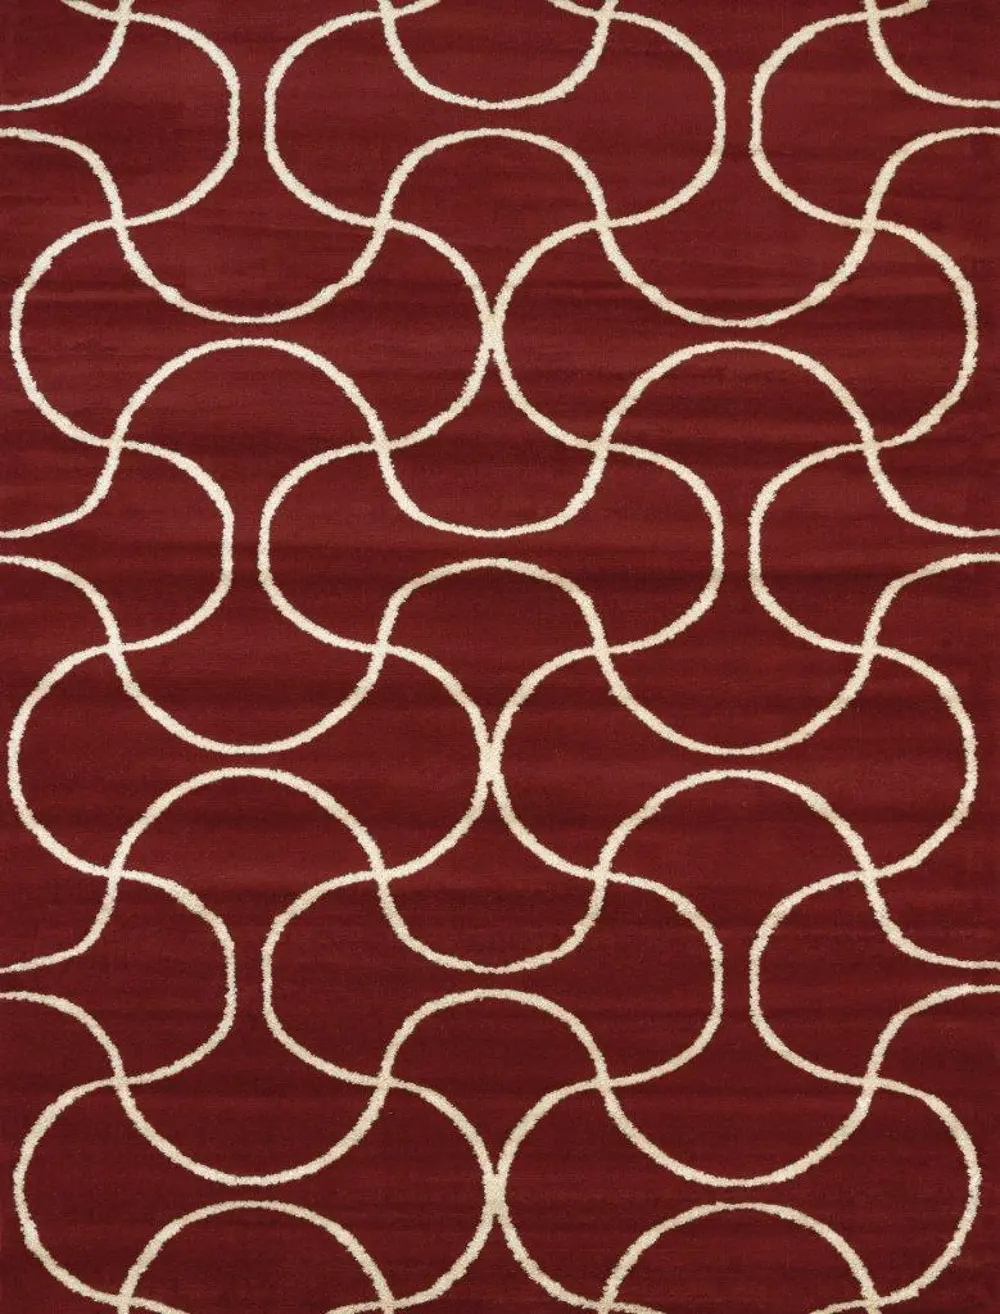 8 x 11 Large Transitional Red Area Rug - Visions-1